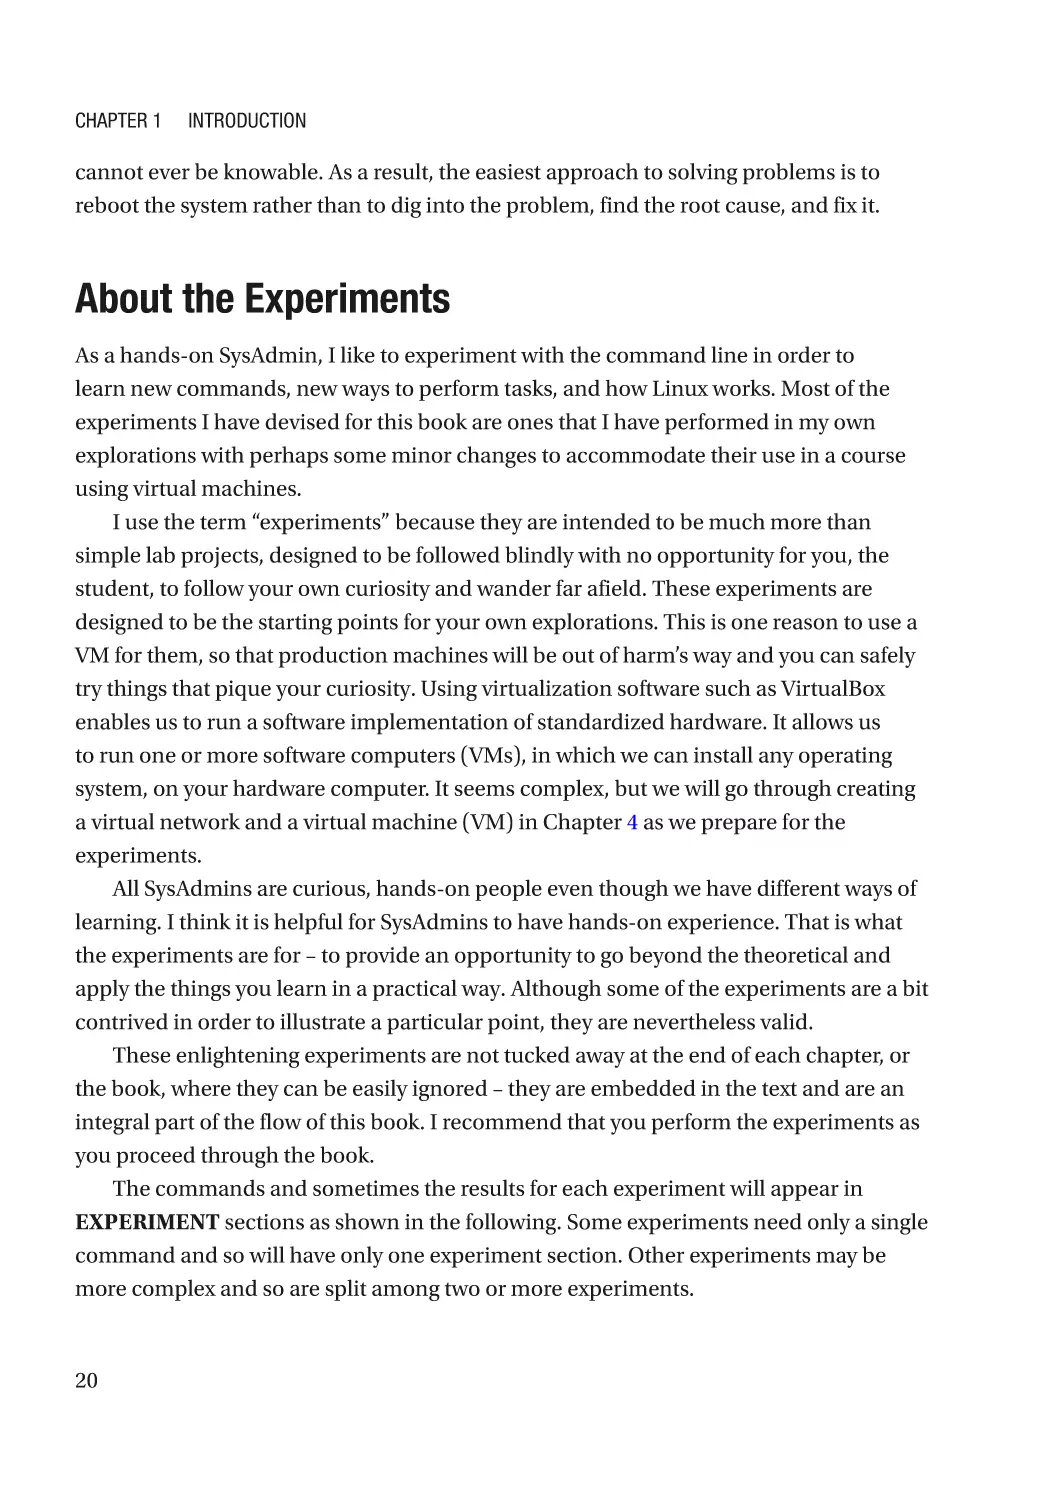 About the Experiments